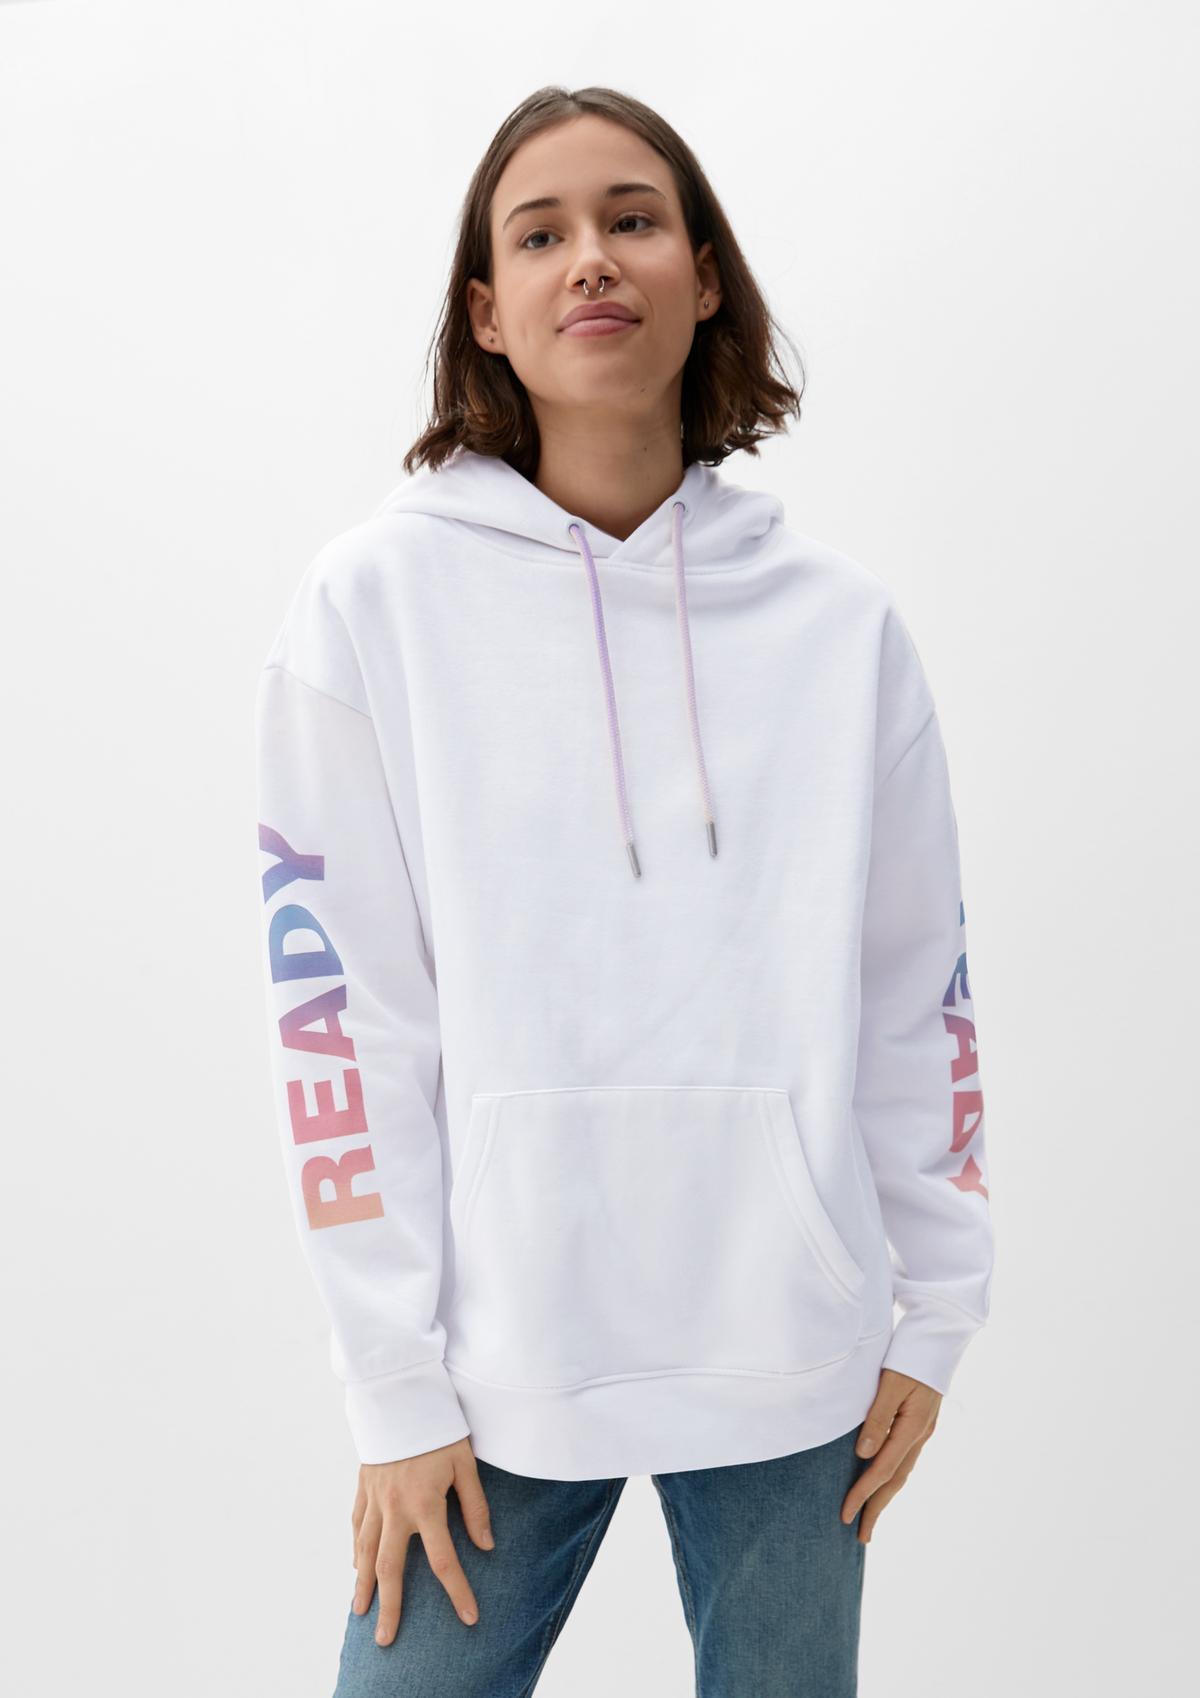 Hooded sweatshirt with a back white print 